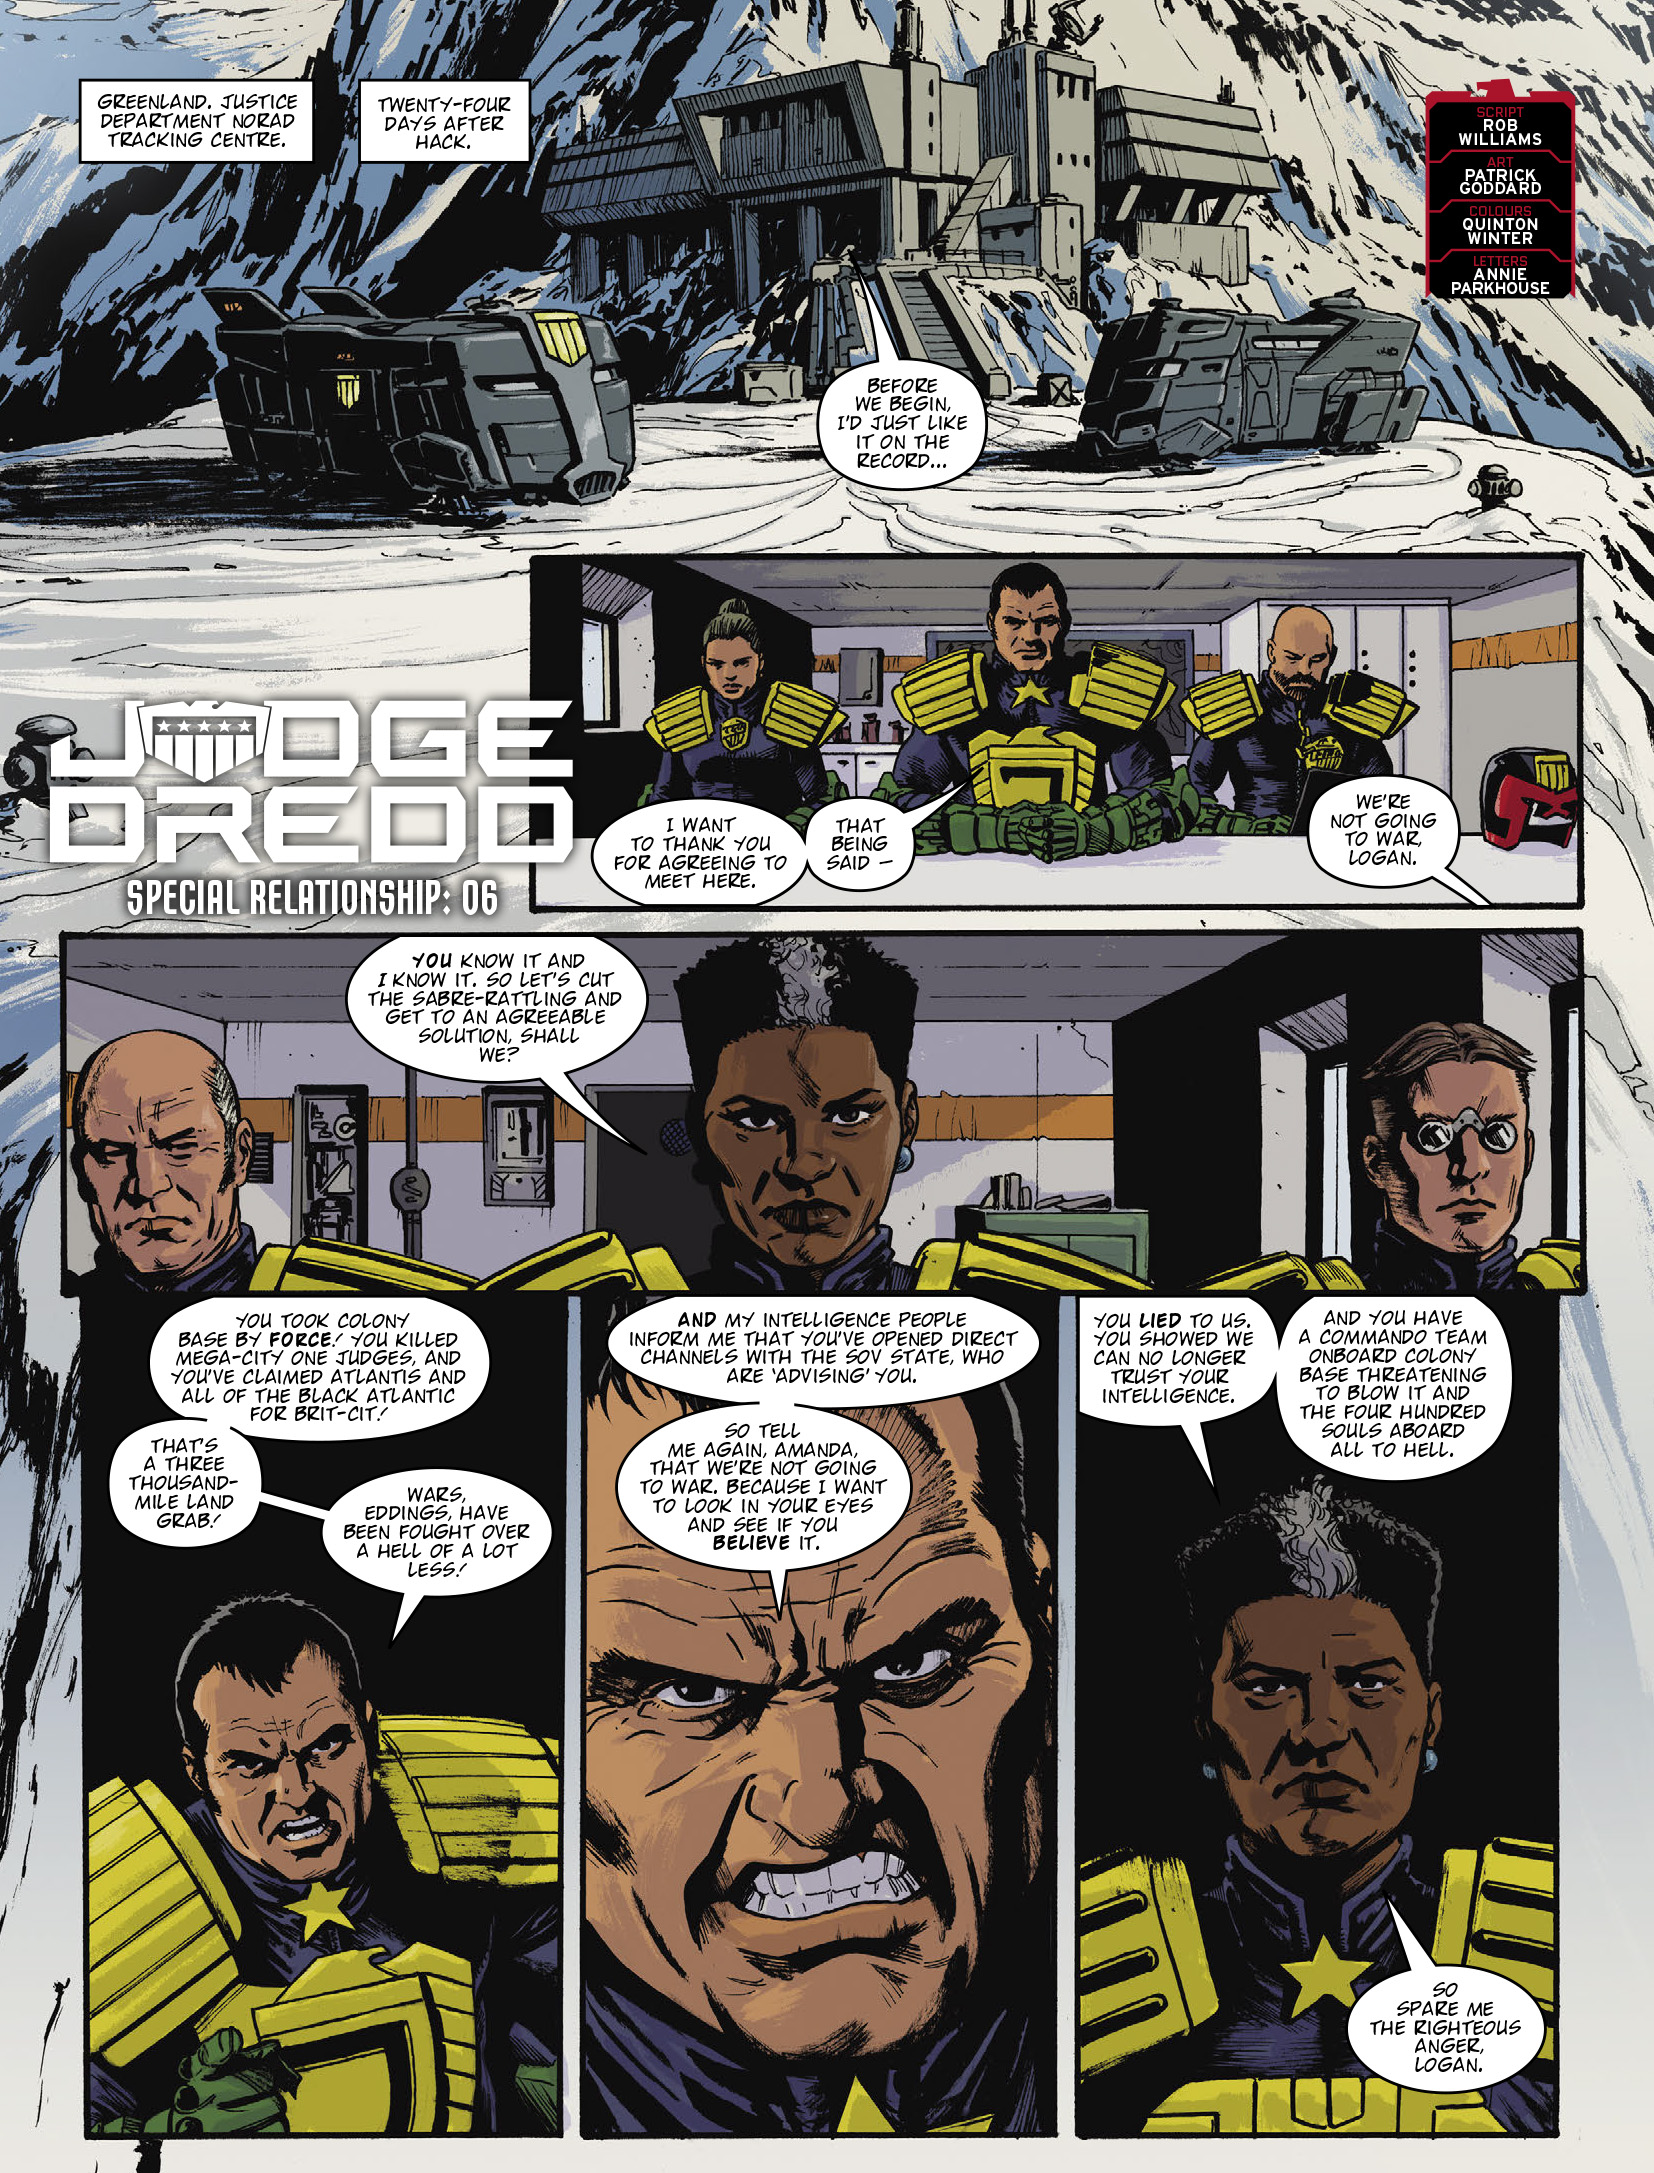 2000 AD: Chapter 2294 - Page 3